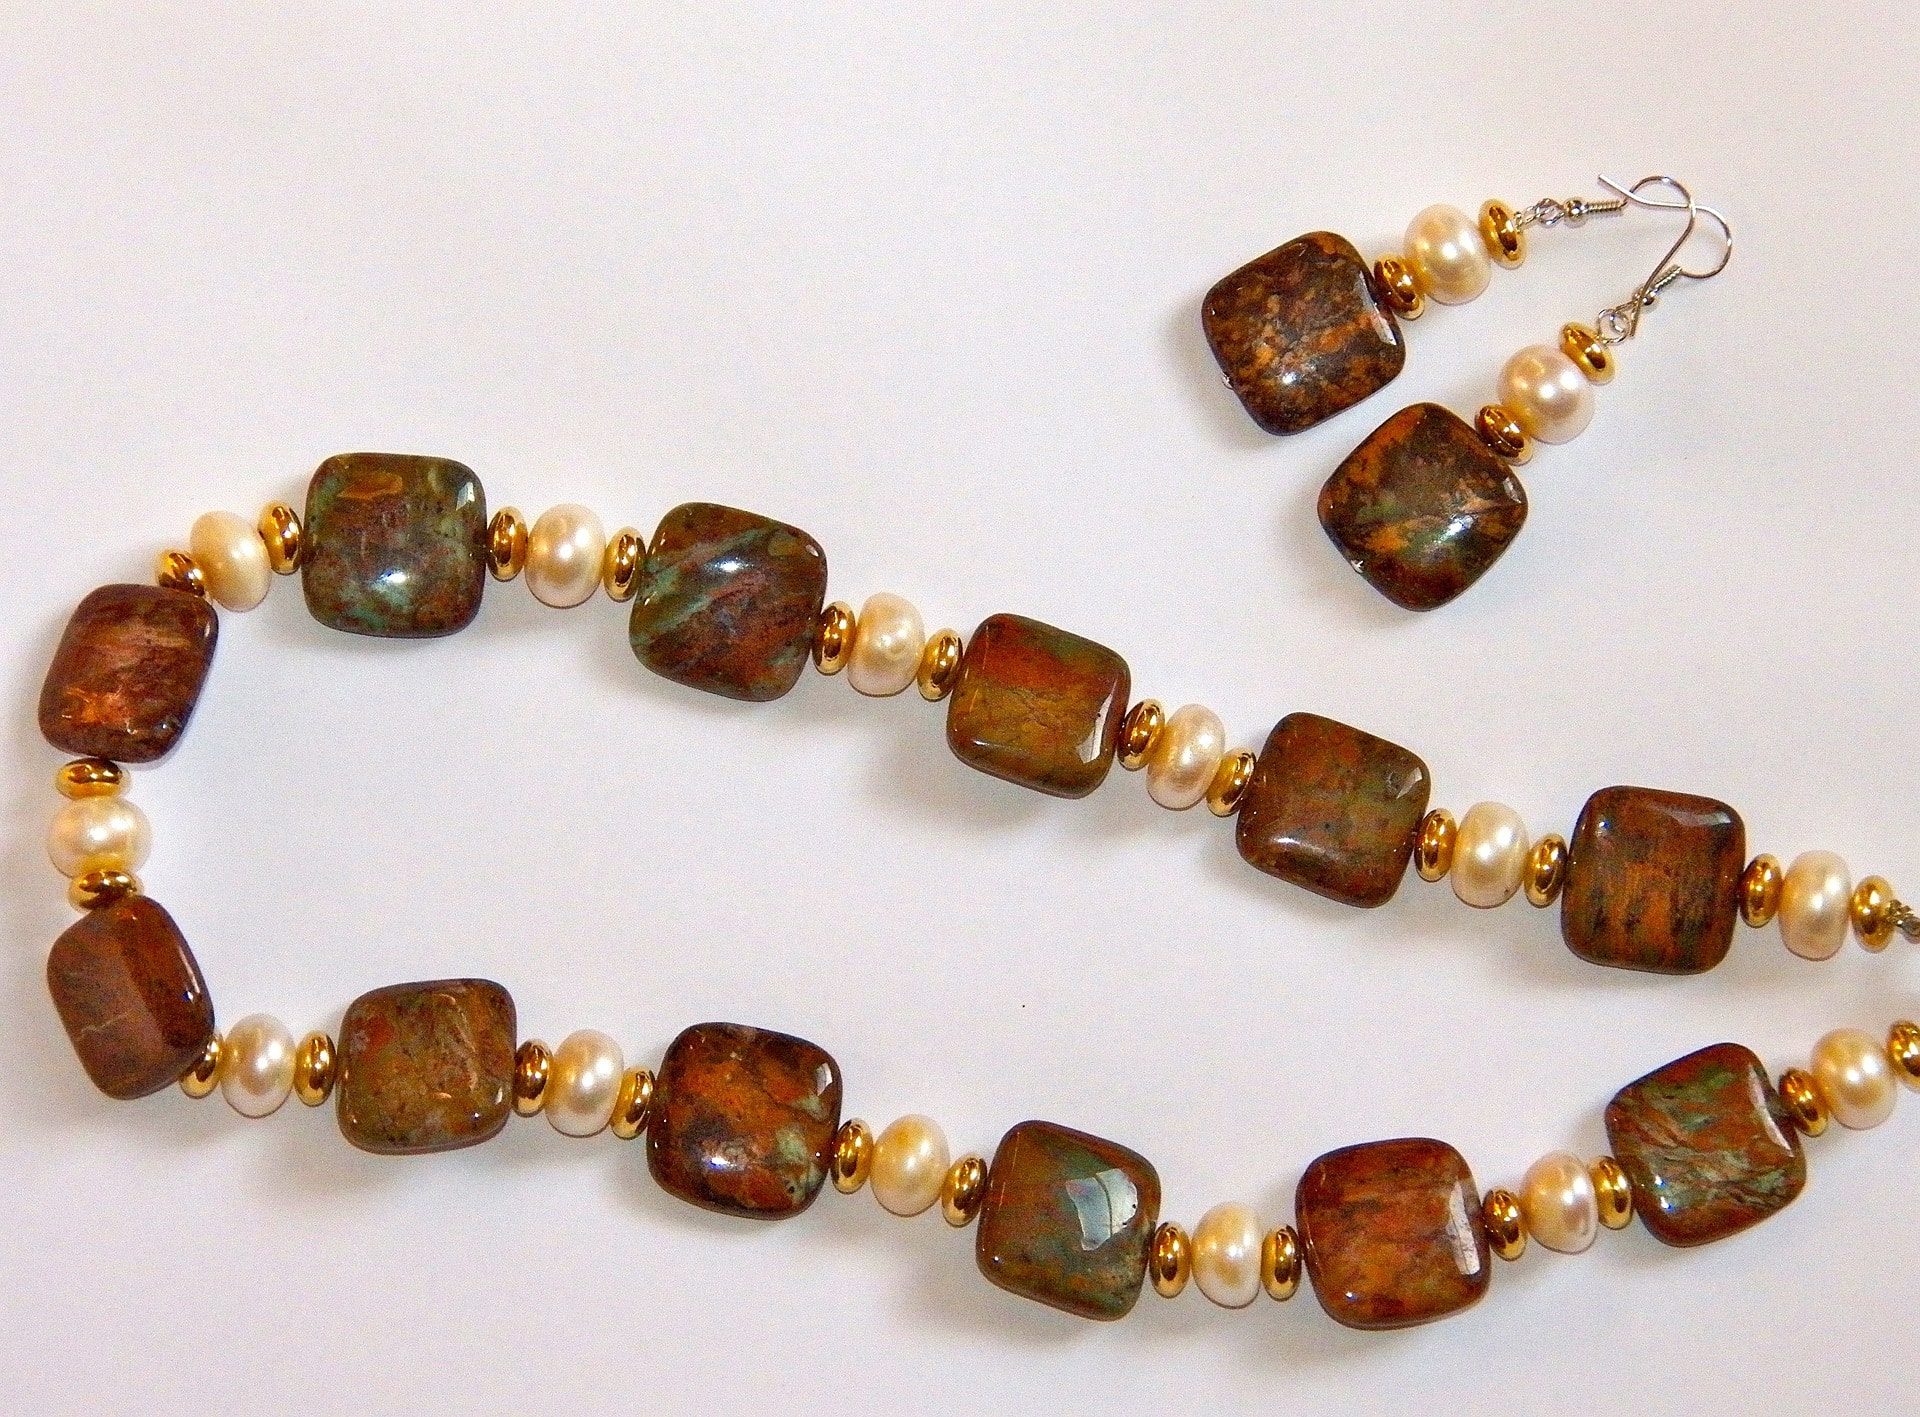 Jasper necklace and earrings set